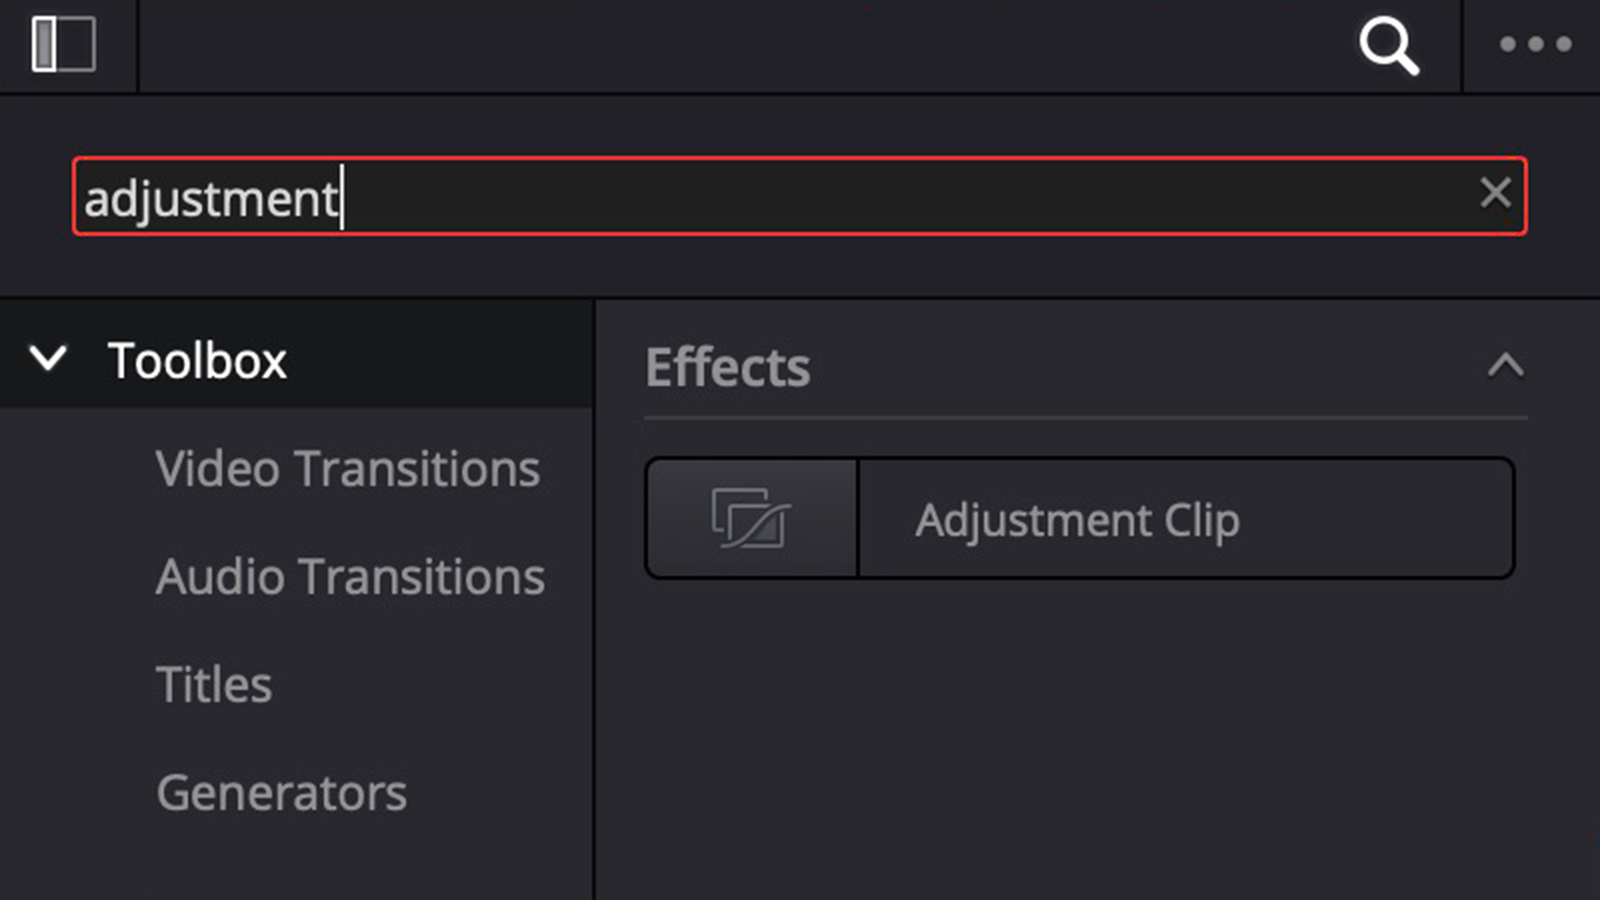 Adding an adjustment clip to the timeline is quicker than adding edits to a clip.